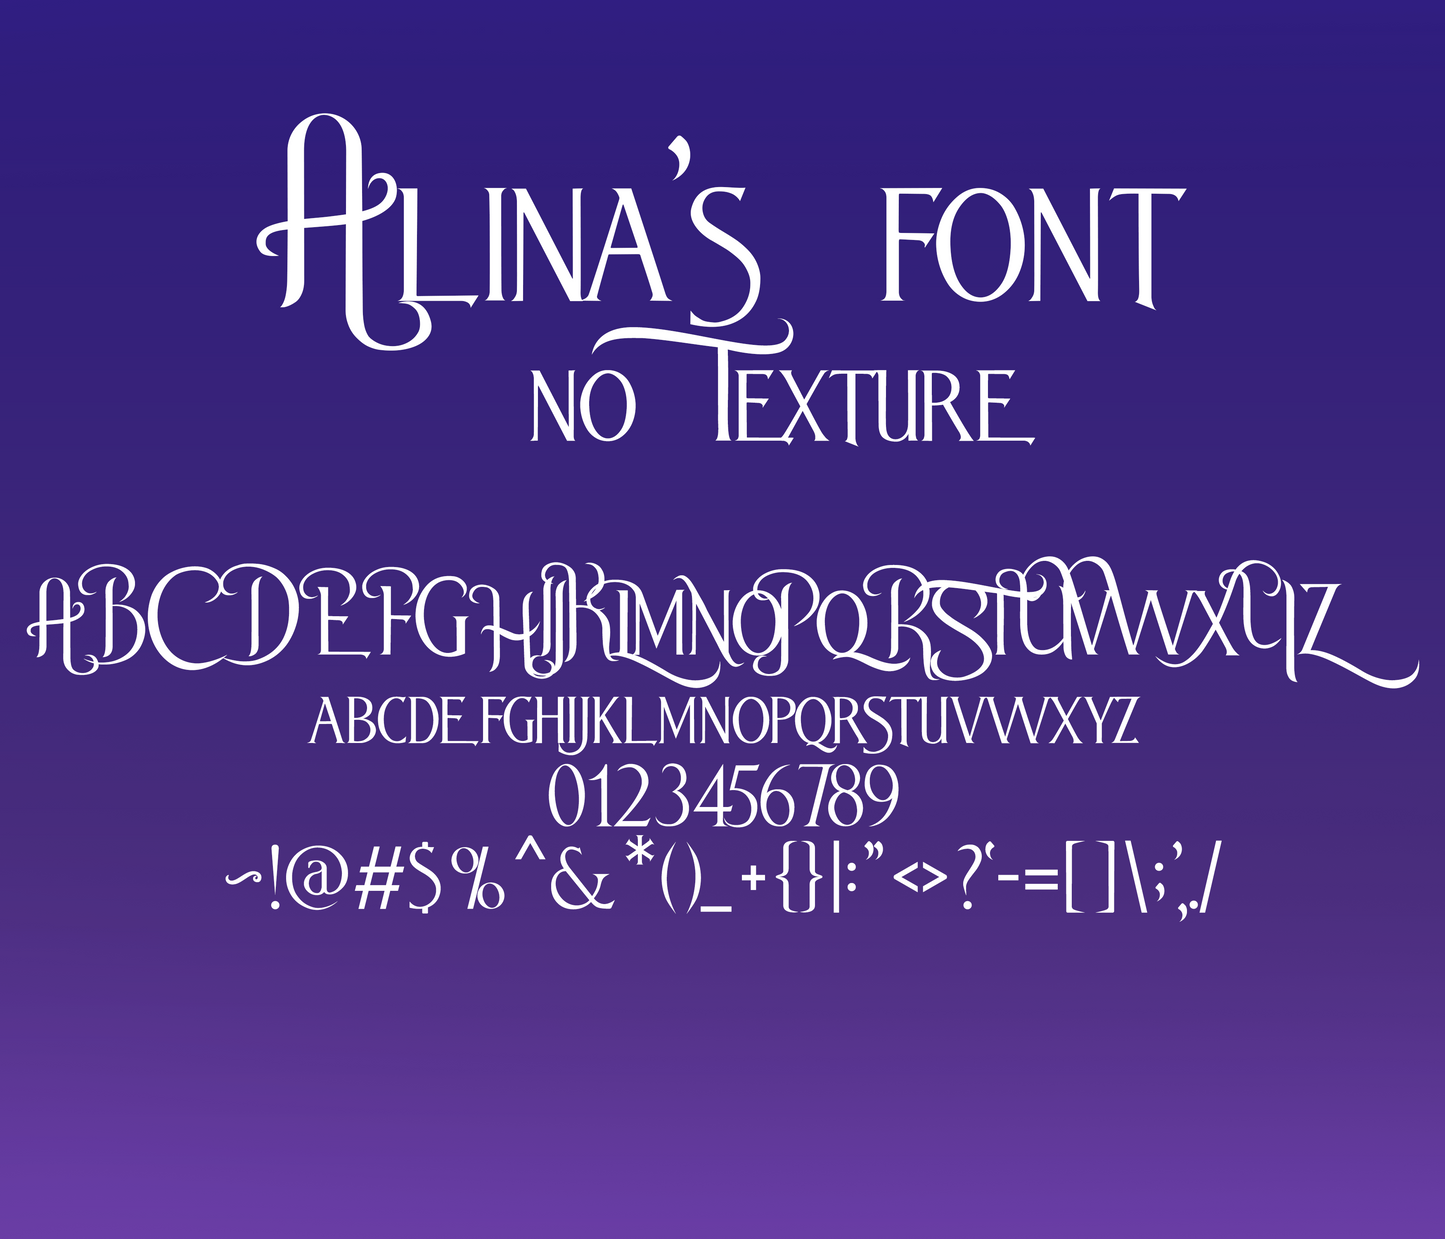 Beauty and the Beast-Inspired Font